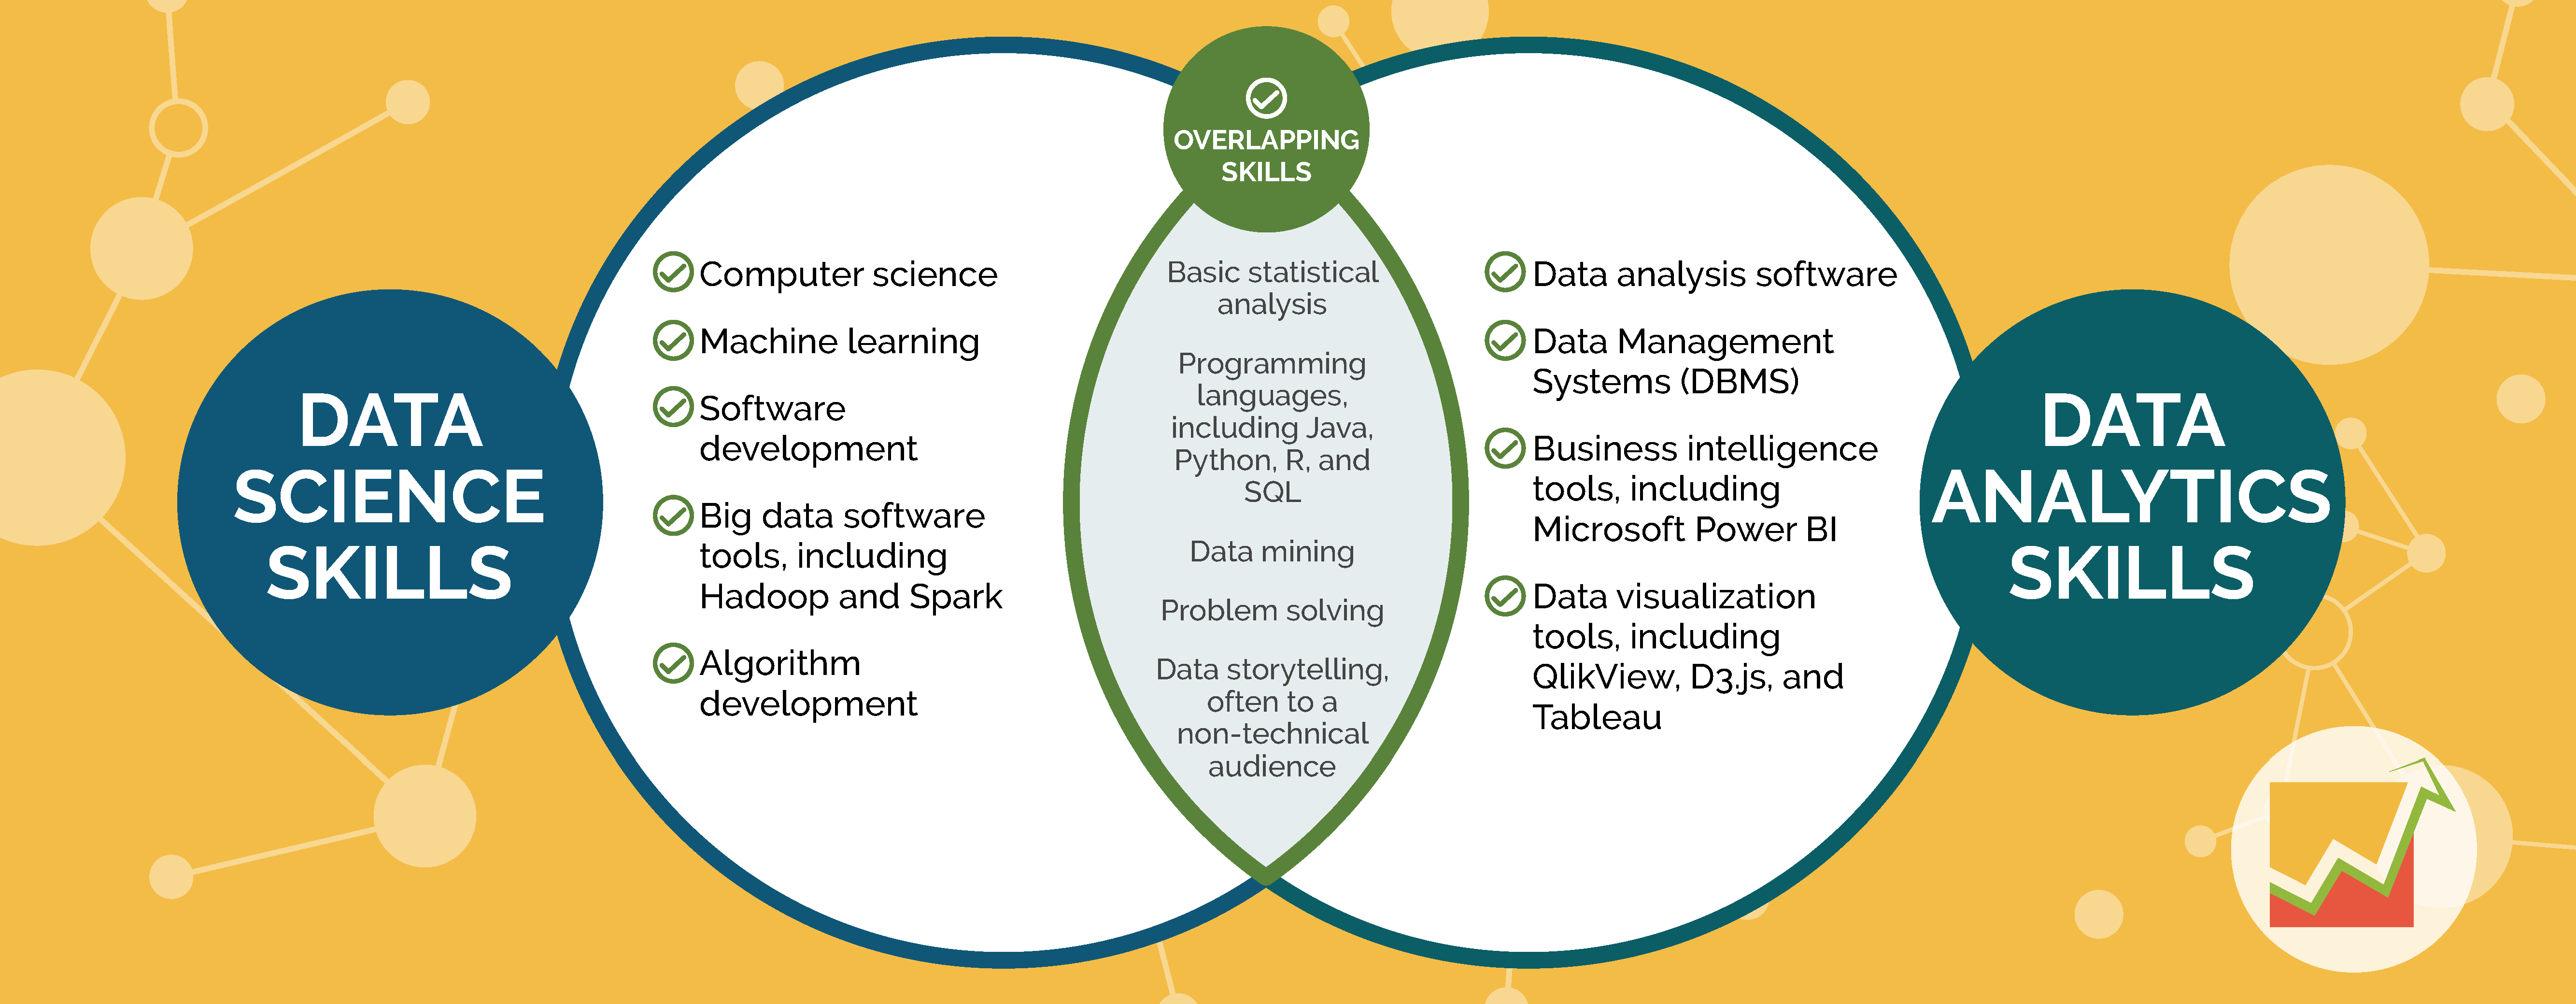 Data Science vs. Data Analytics: The Differences Explained ...